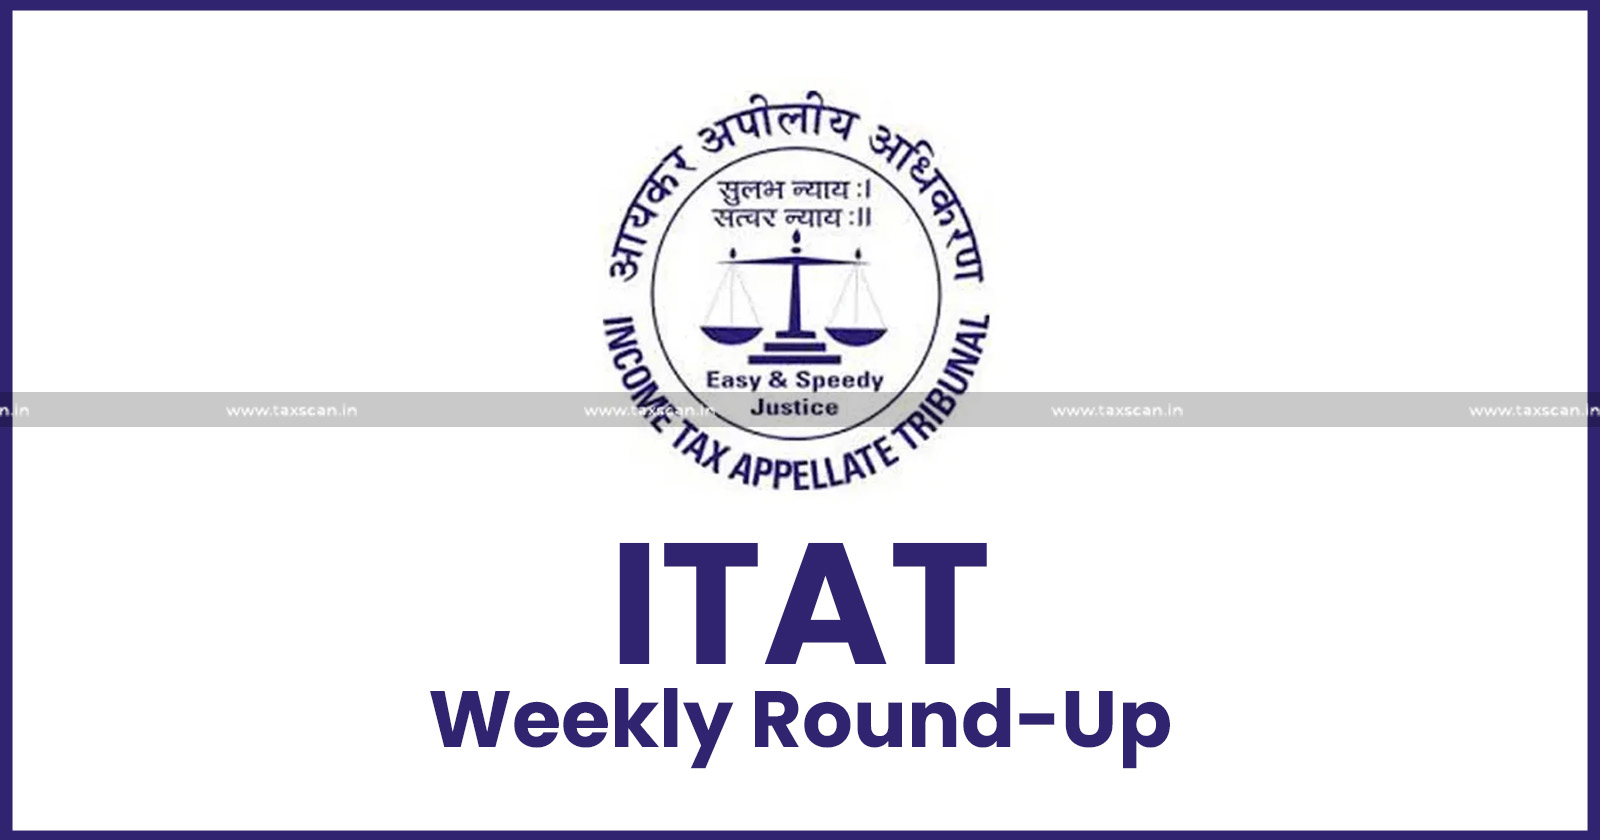 ITAT Weekly Round-Up - Weekly Round-Up - ITAT - taxscan